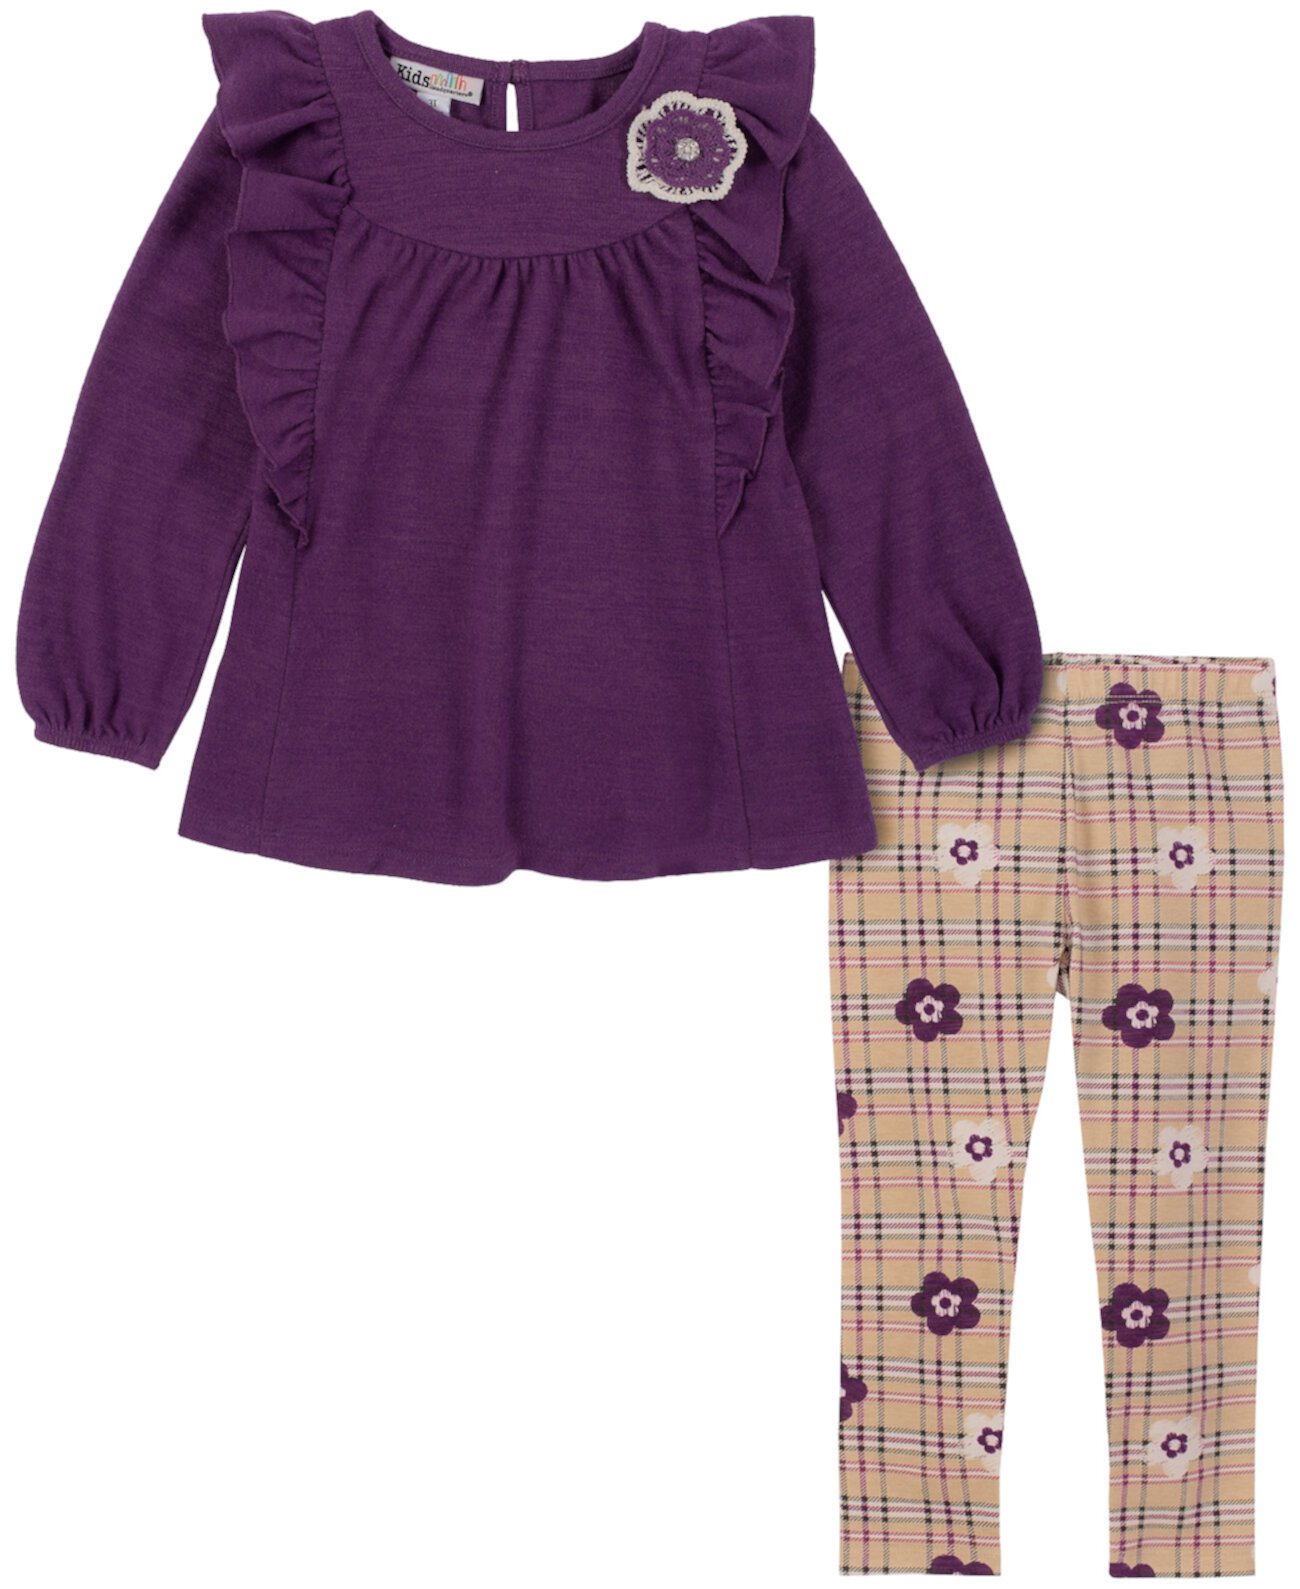 Toddler Girls Babydoll Tunic and Floral Plaid Leggings, 2 Piece Set Kids Headquarters